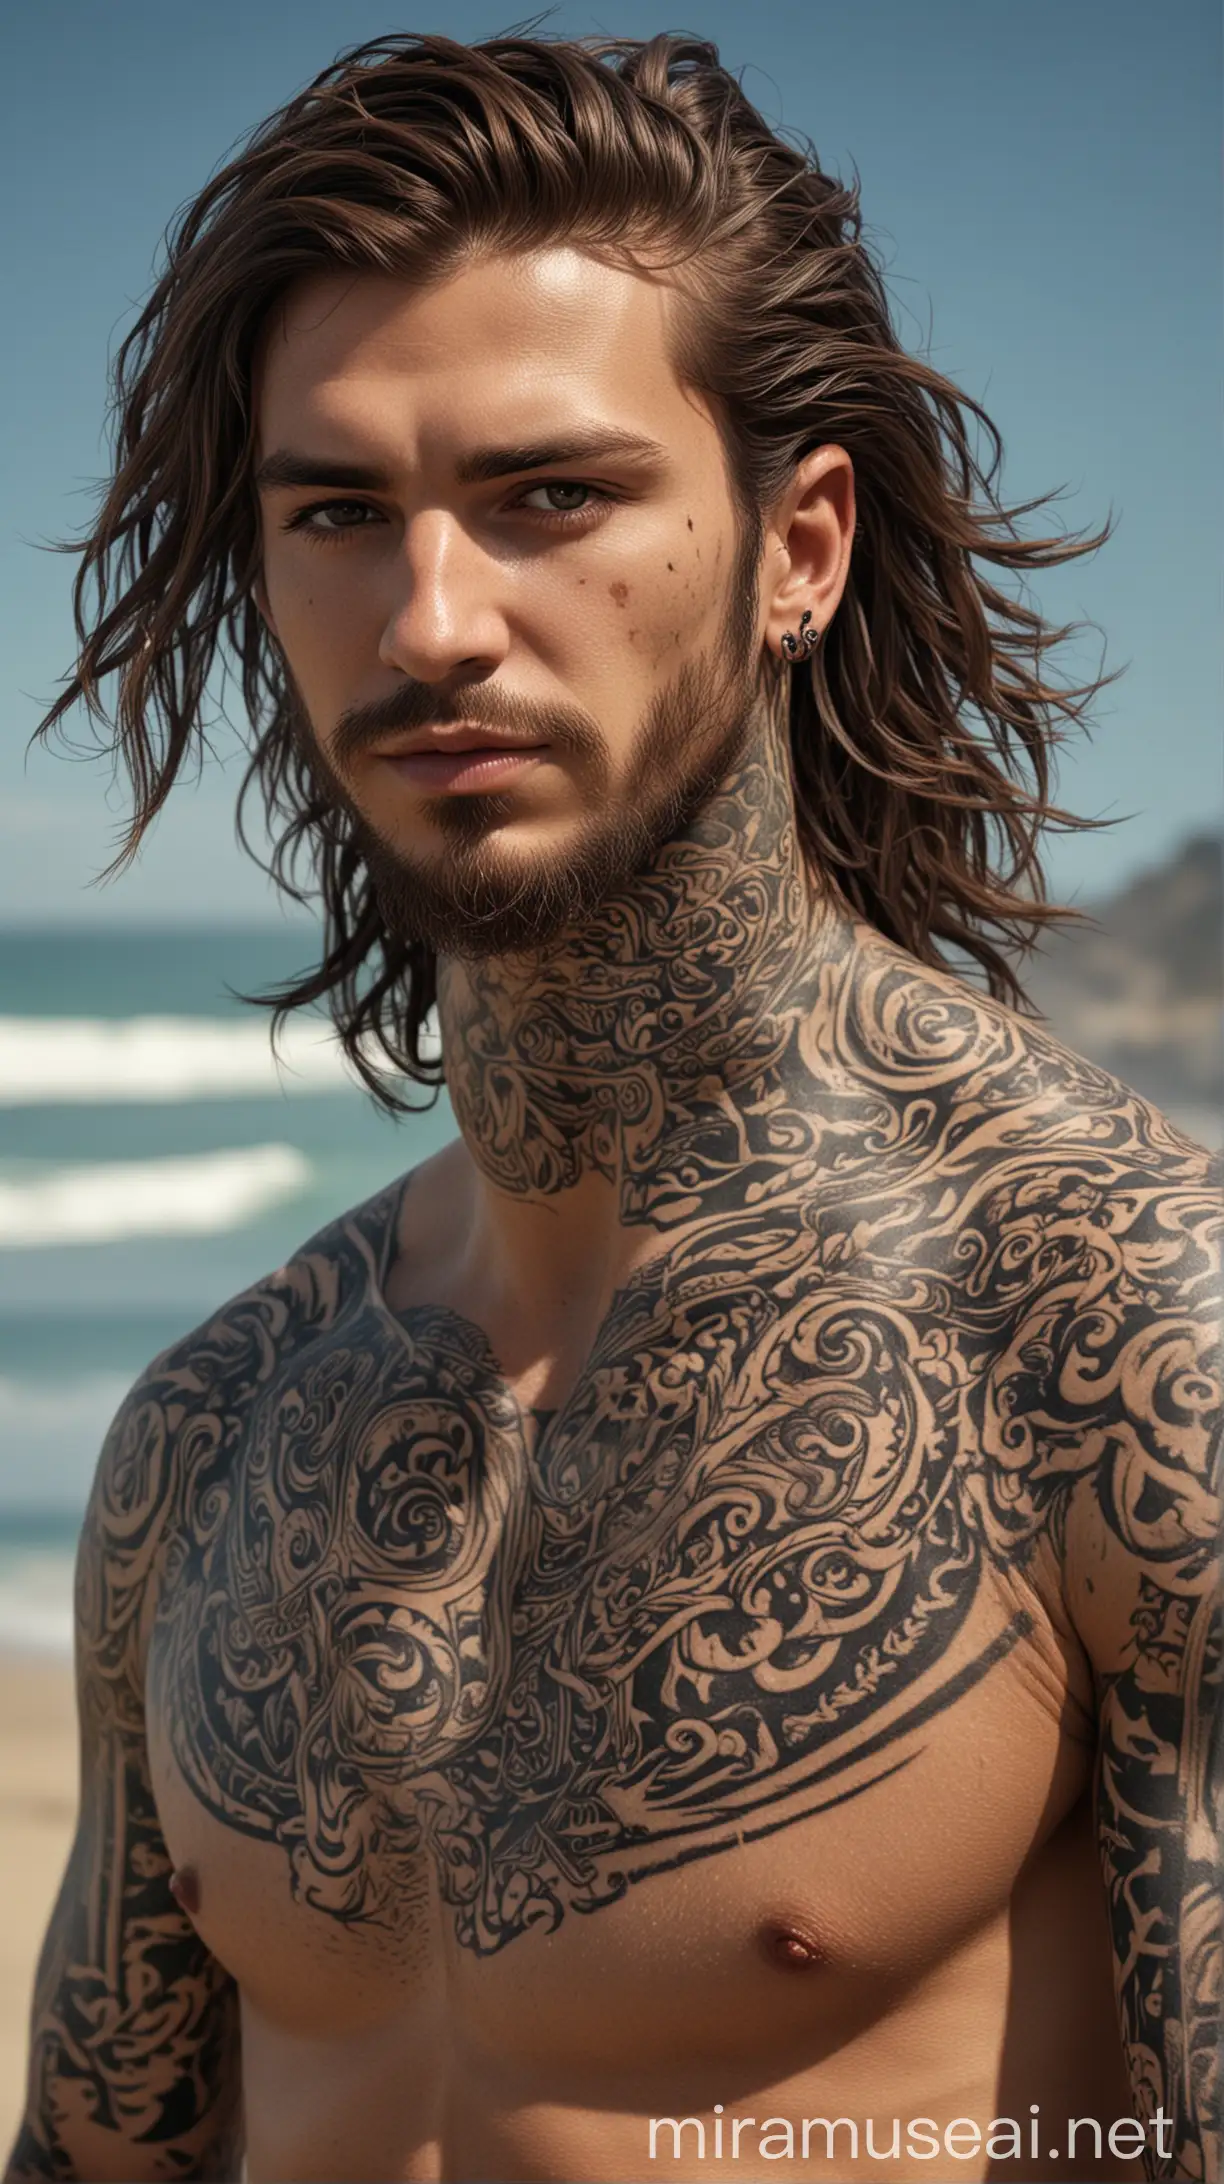 Luscious Haired Man with Tattoos Beach Portrait in Ultra High Resolution 3D